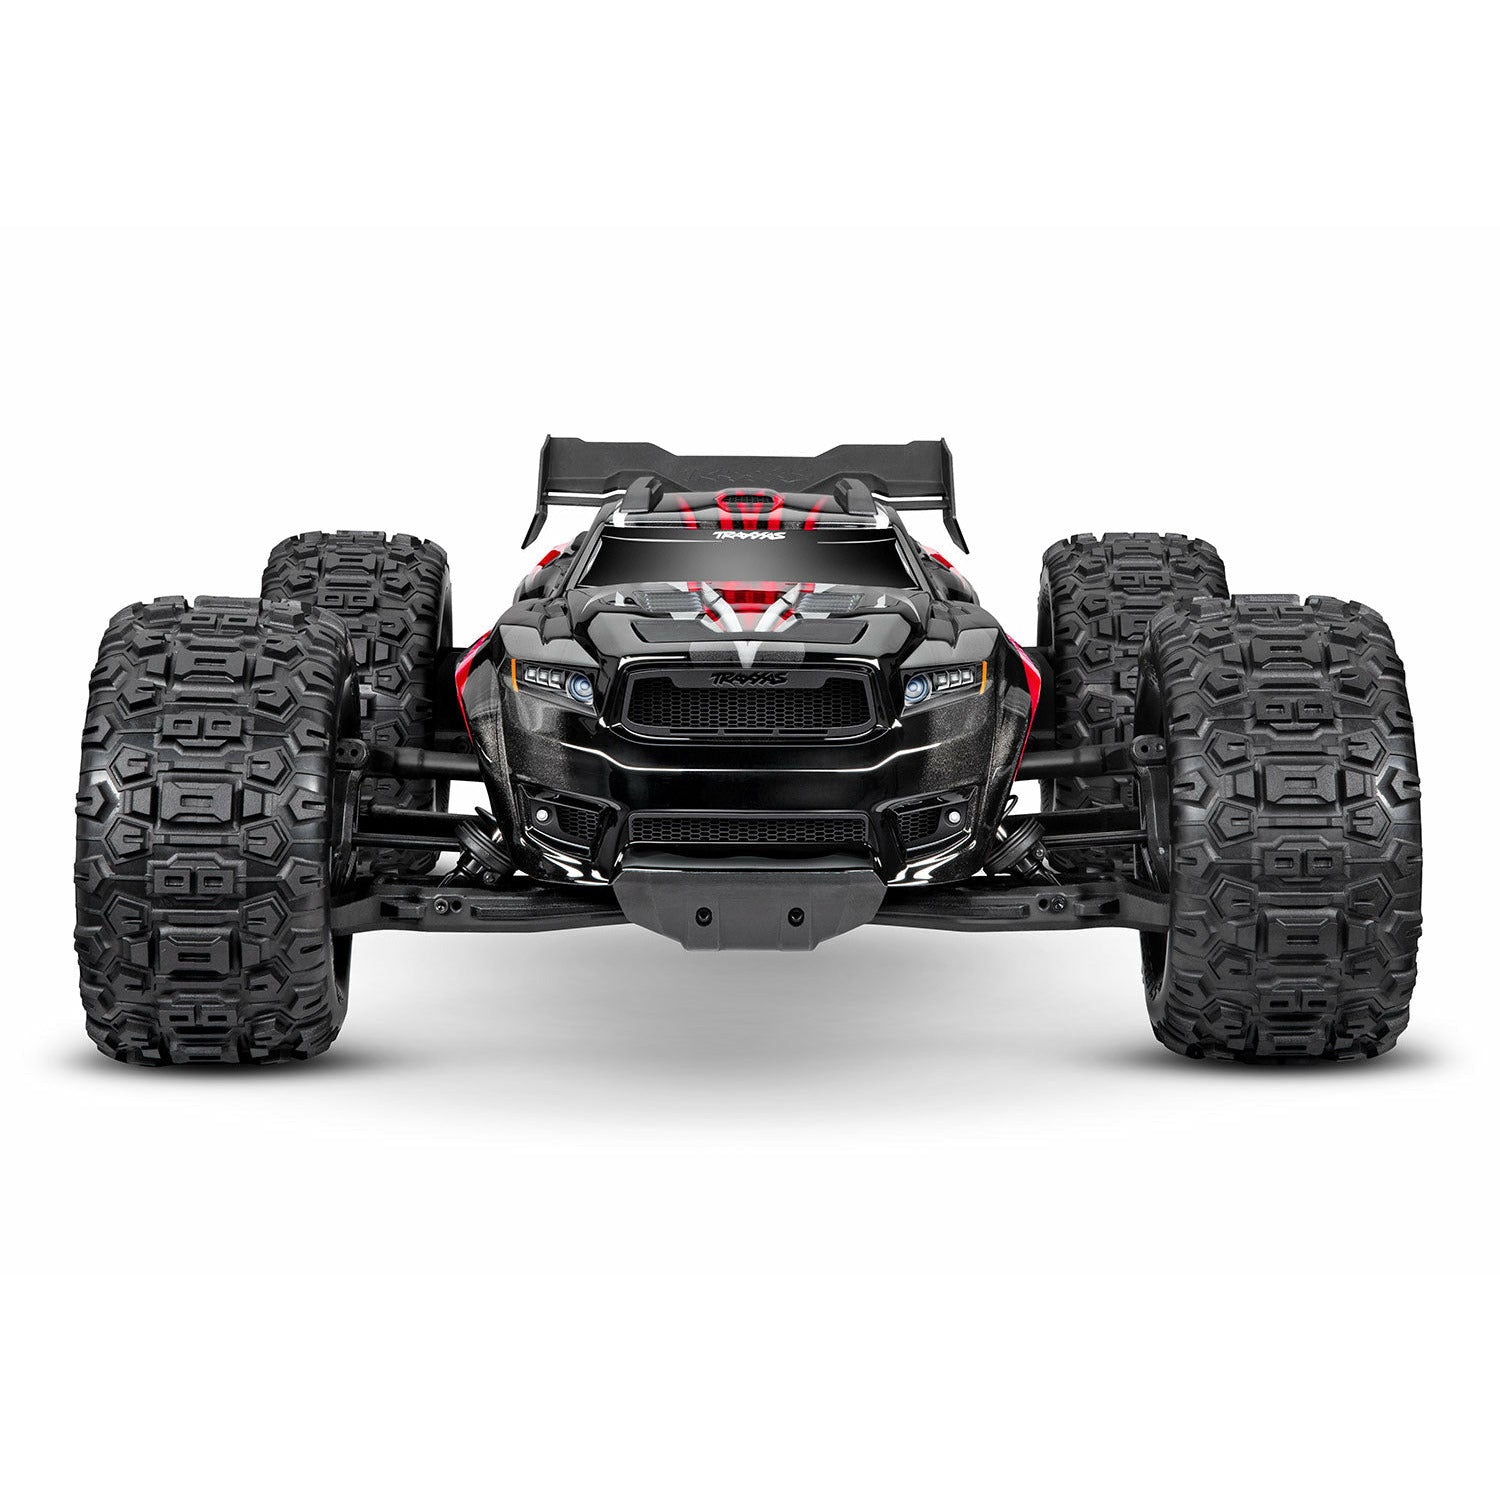 TRAXXAS Sledge Belted 1/8 Scale 4WD Brushless Electric Monster Truck - Red